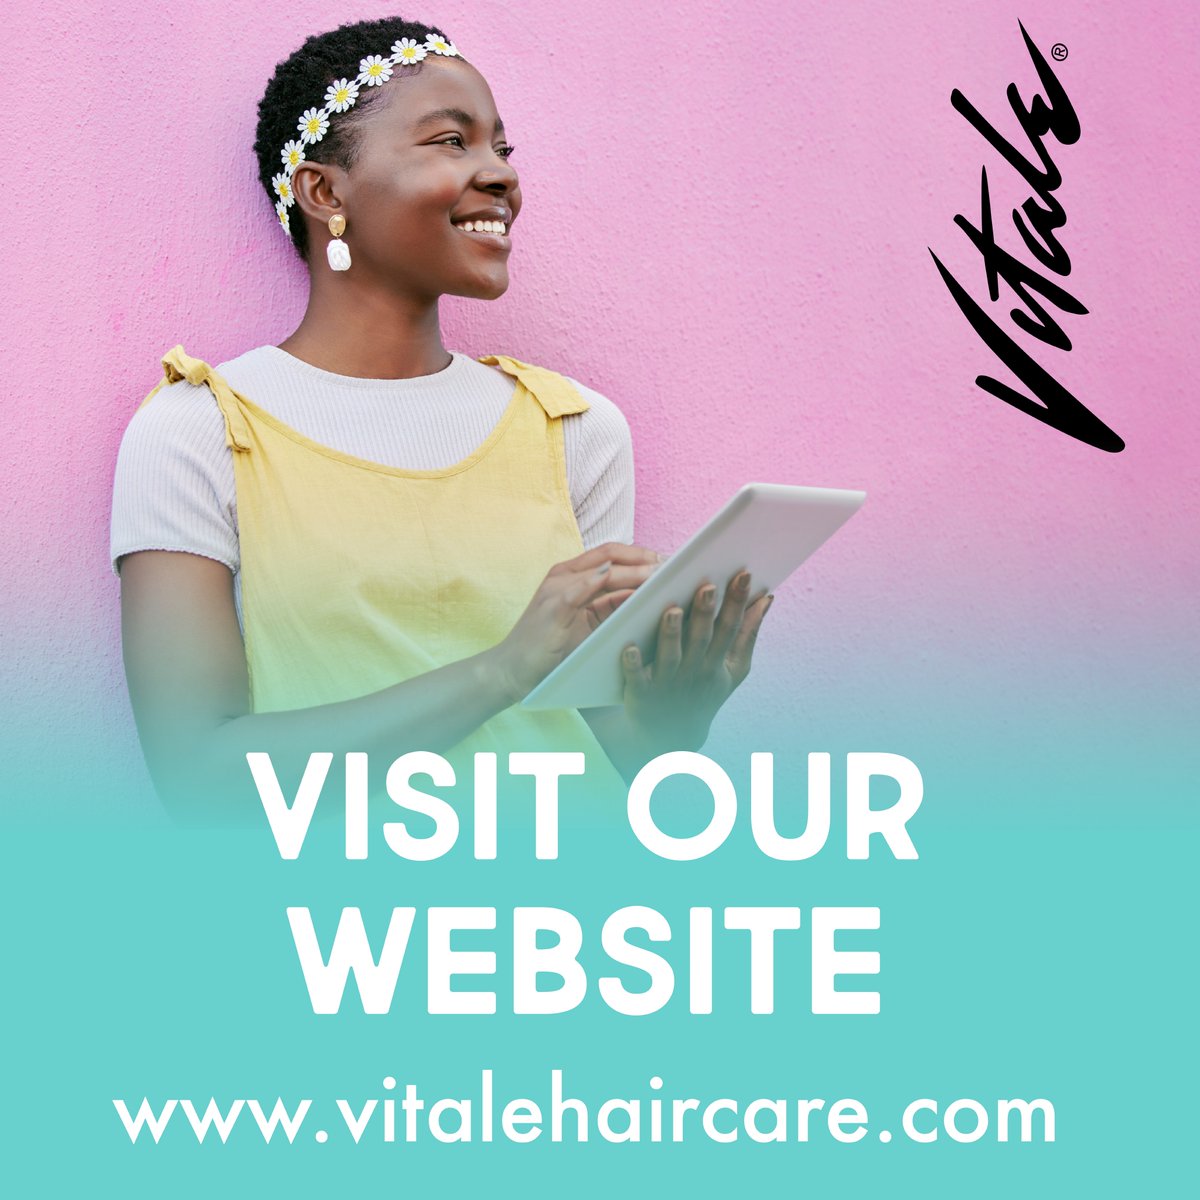 Unlock your best hair days without breaking the bank! ✨ Visit our website for top-notch hair care at unbeatable prices. Have questions or comments? We're all ears! Reach out anytime. 💬
#vitaleproducts #braids #braidsheen #protectivestyles #lockandtwistgel #braidingproducts